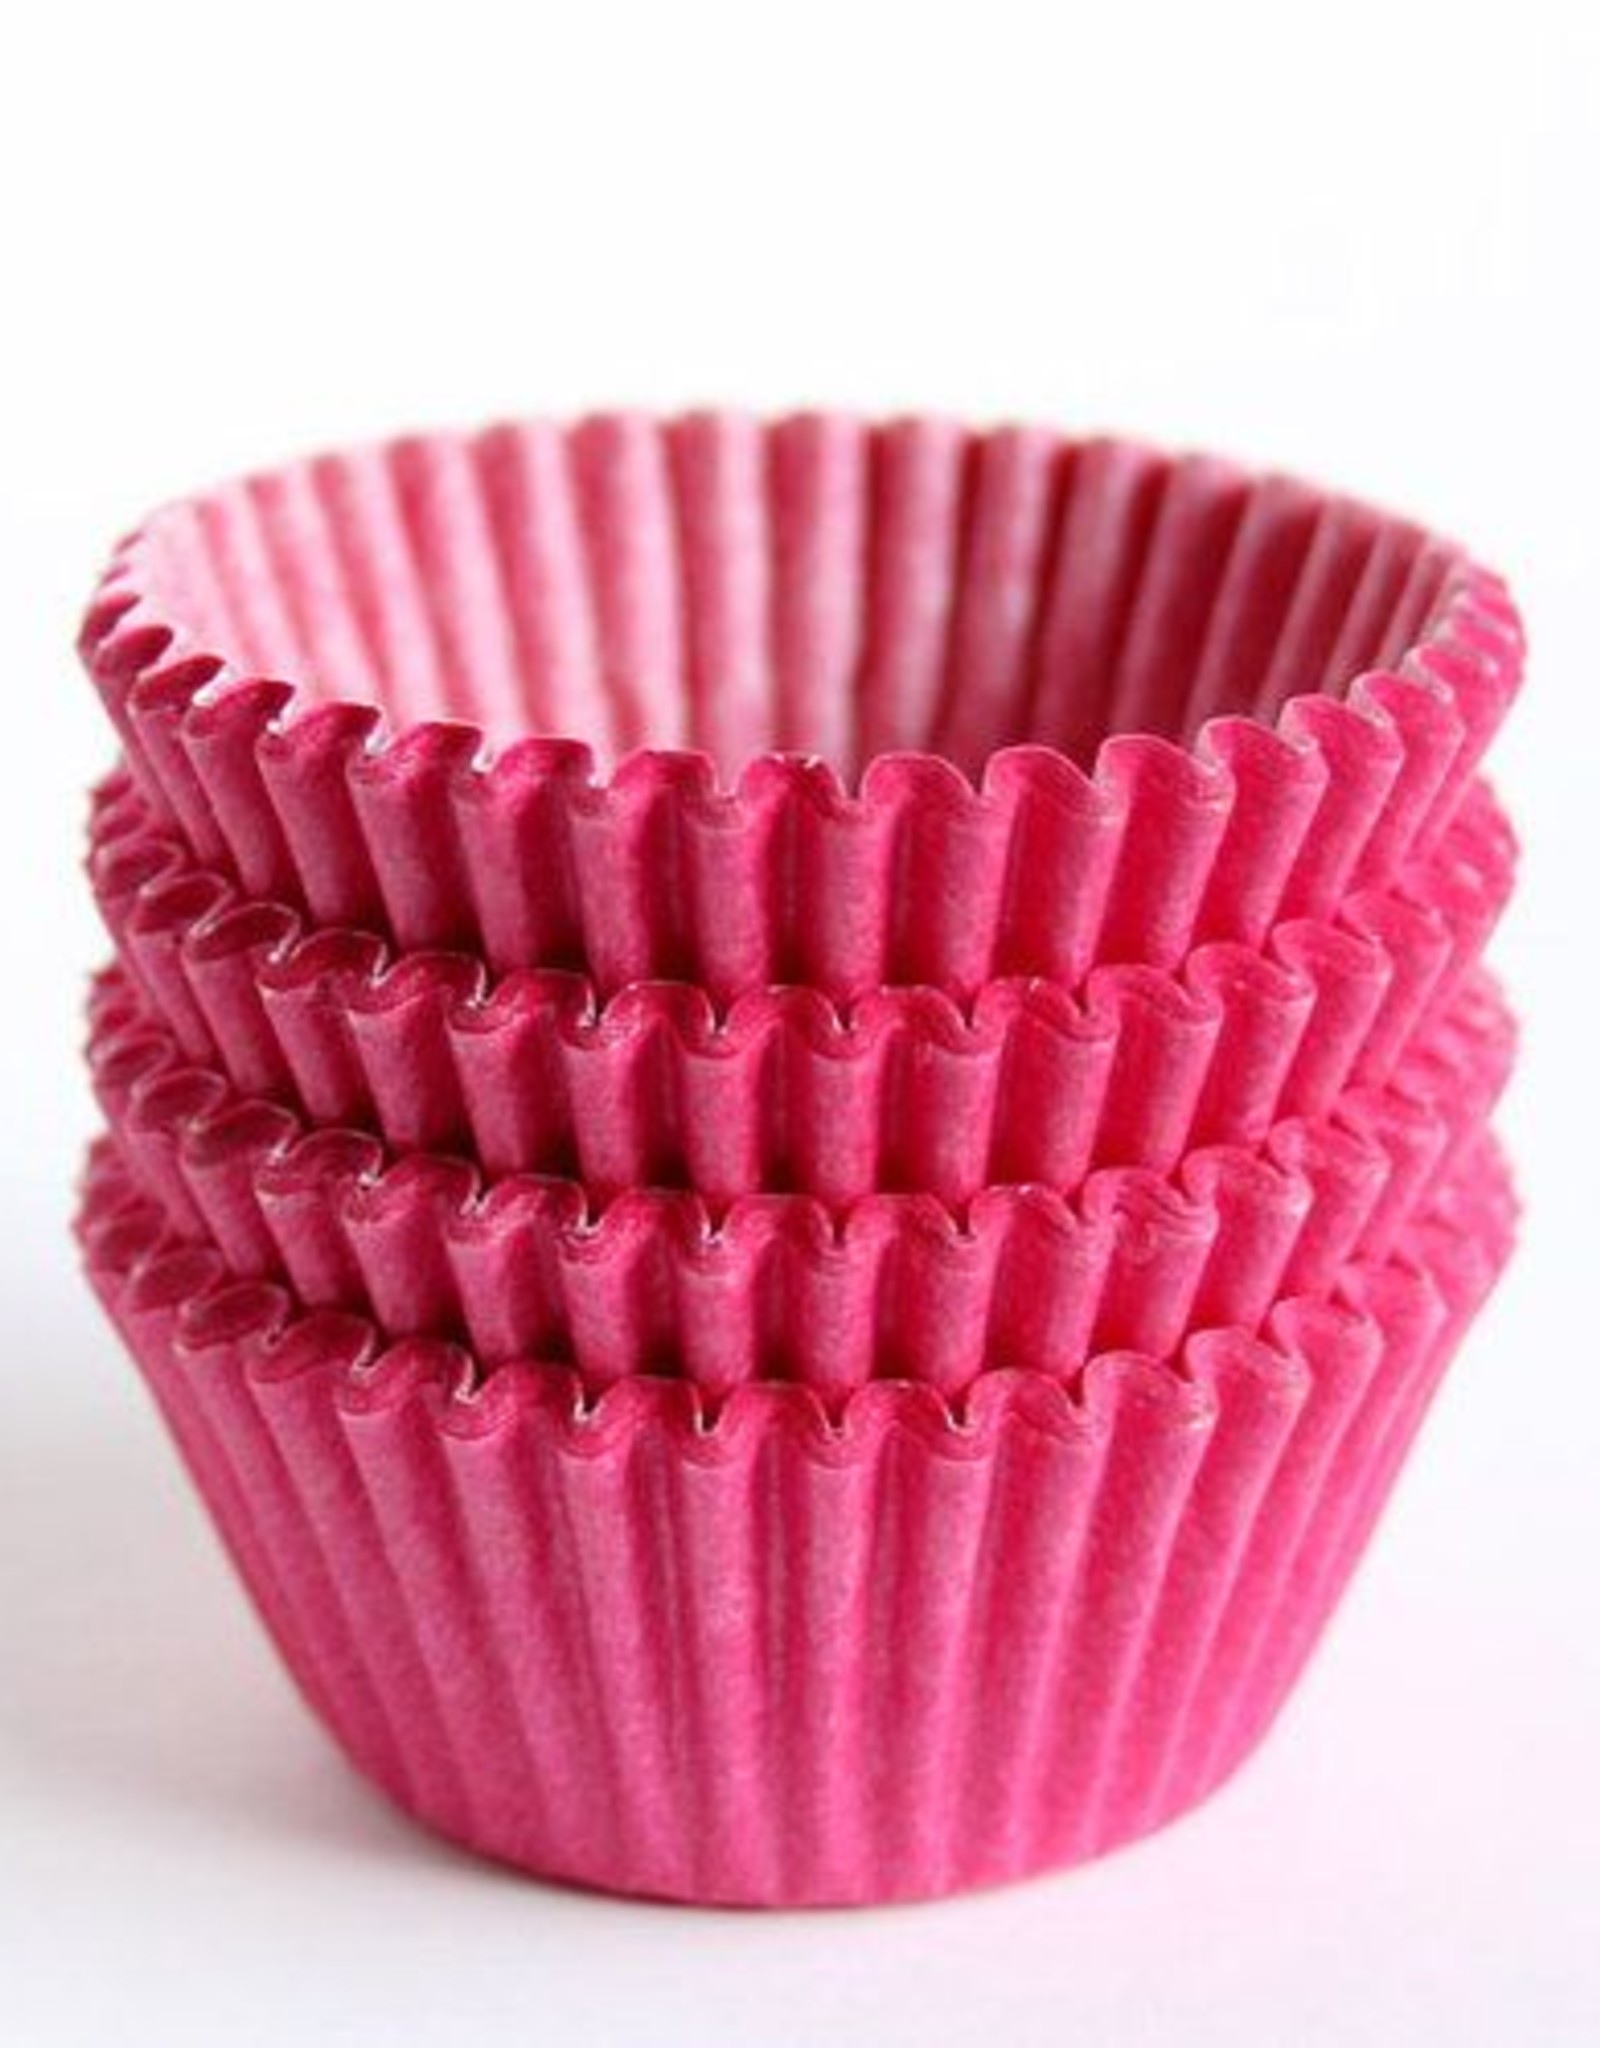 Hot Pink Baking Cups Mini (40-50 ct)